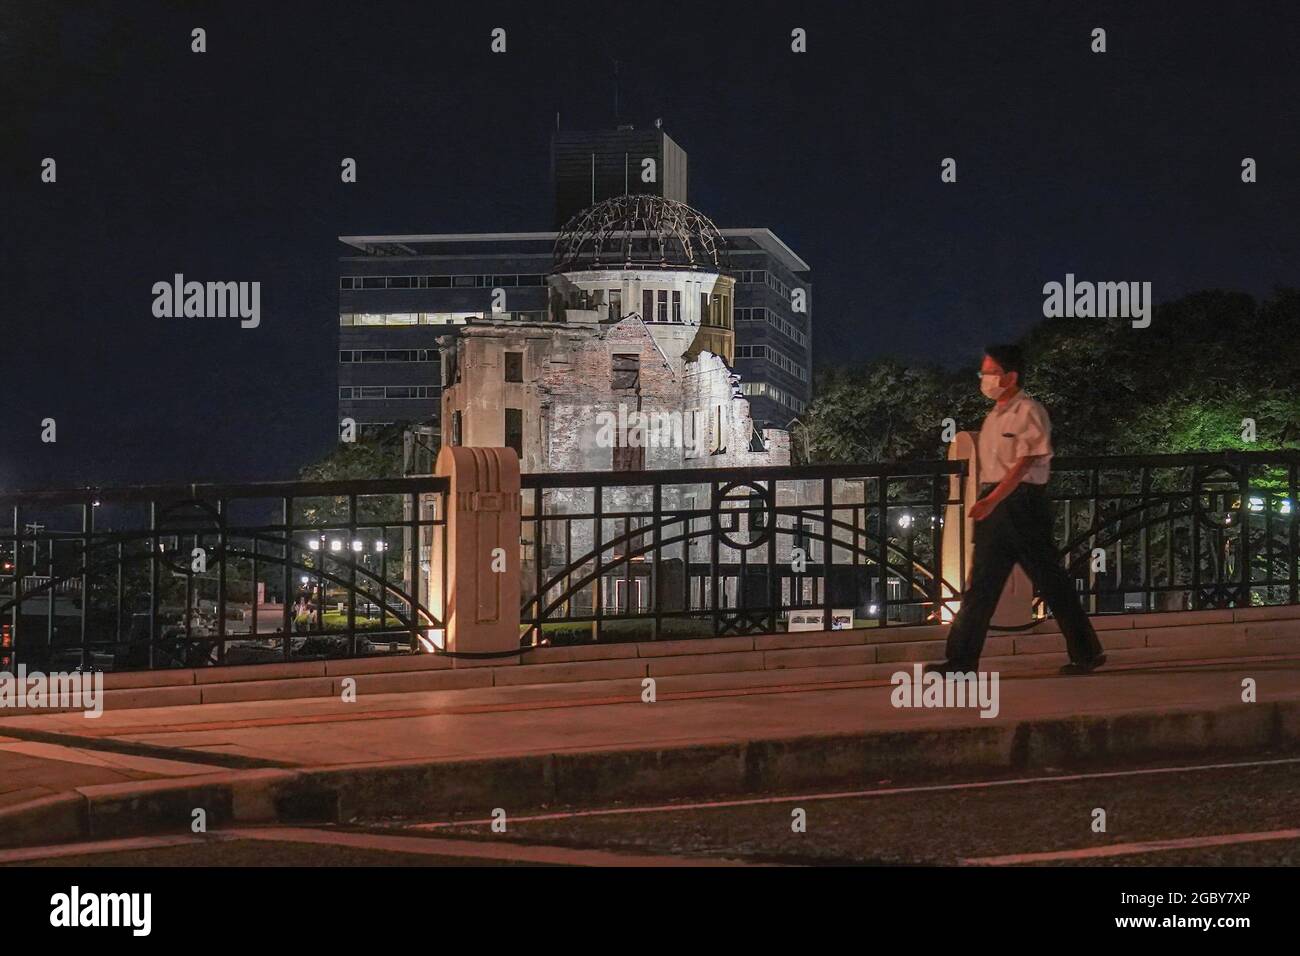 Hiroshima, Japan. 05th Aug, 2021. A man wearing a face mask as a precaution against the spread of covid-19 walks past the Atomic Bomb Dome that lights up at night. This Friday will mark the 76th anniversary of the atomic bombing of Hiroshima, which killed about 150,000 people and destroyed the entire city for the first bombing with a nuclear weapon in war. Limited guests and Japan's dignitaries including Prime Minister Yoshihide Suga will attend the Peace Memorial Ceremony amid the coronavirus pandemic. Credit: SOPA Images Limited/Alamy Live News Stock Photo